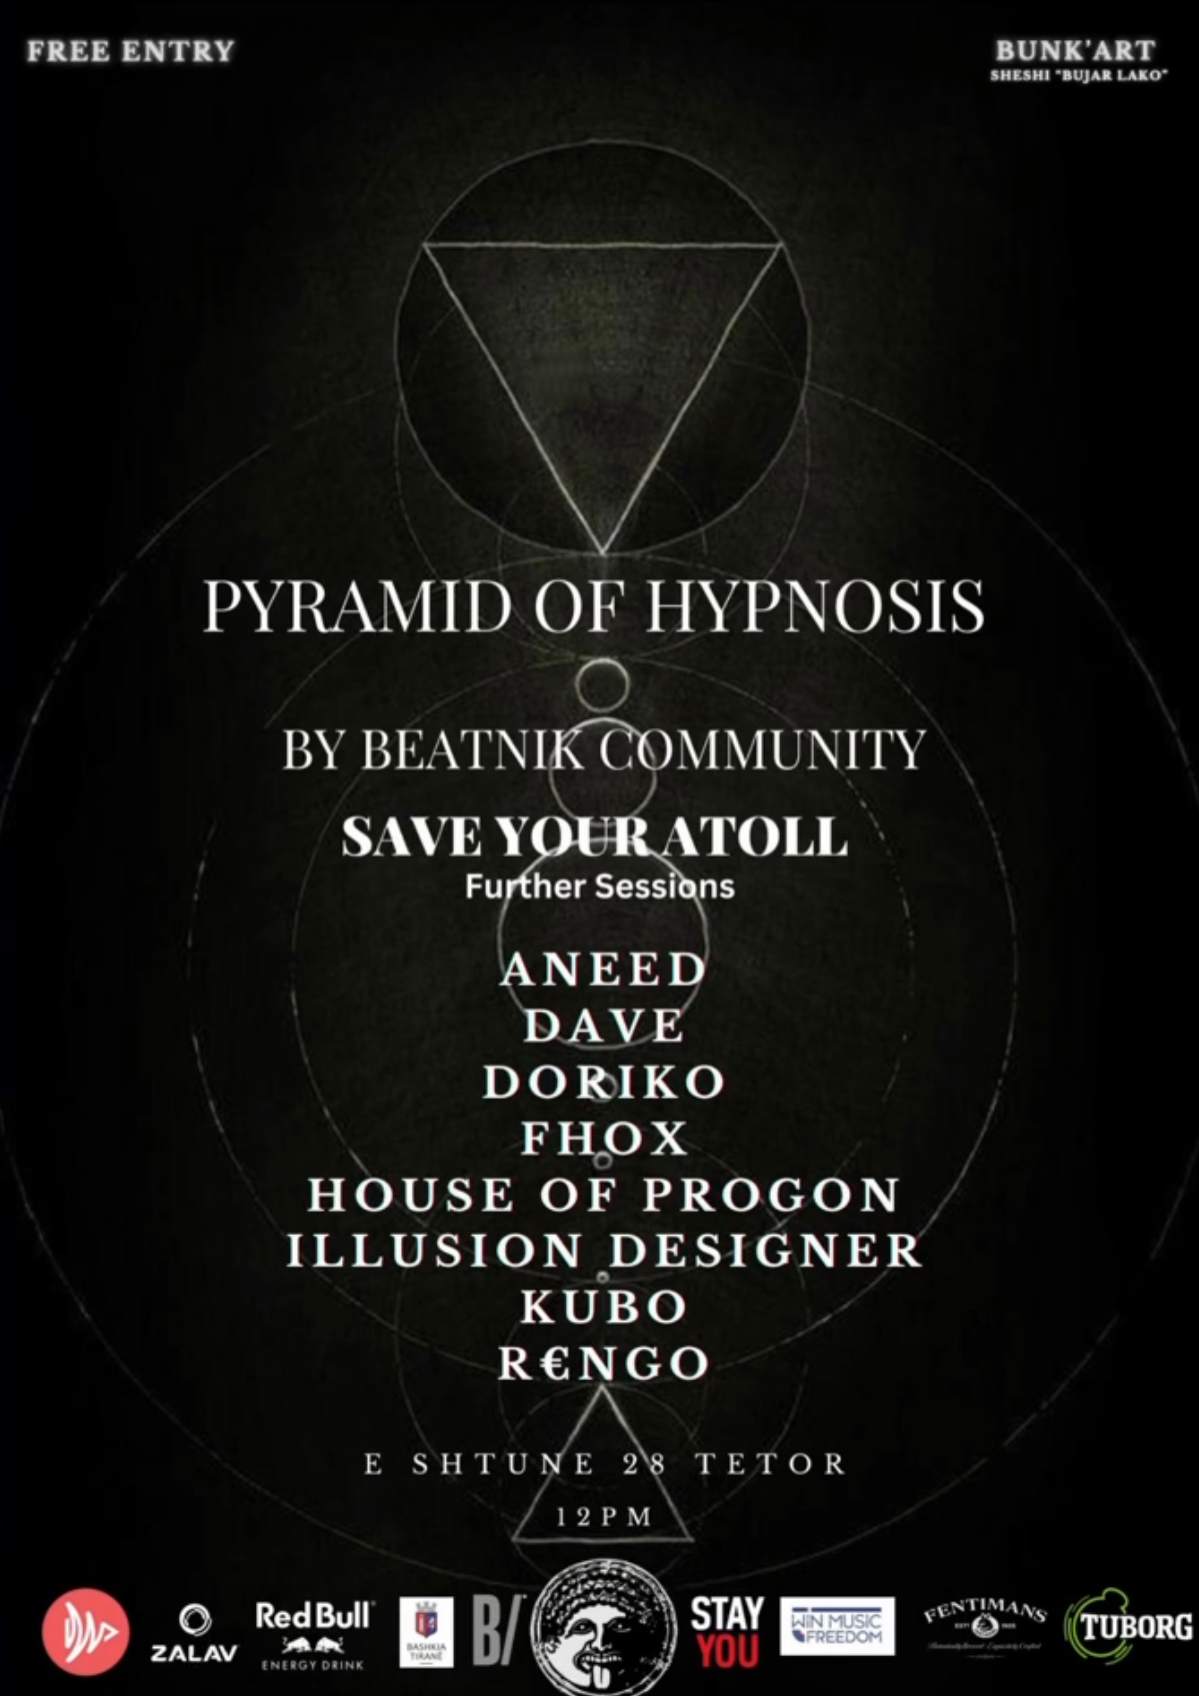 Pyramid of Hypnosis w/Save Your Atoll - フライヤー裏